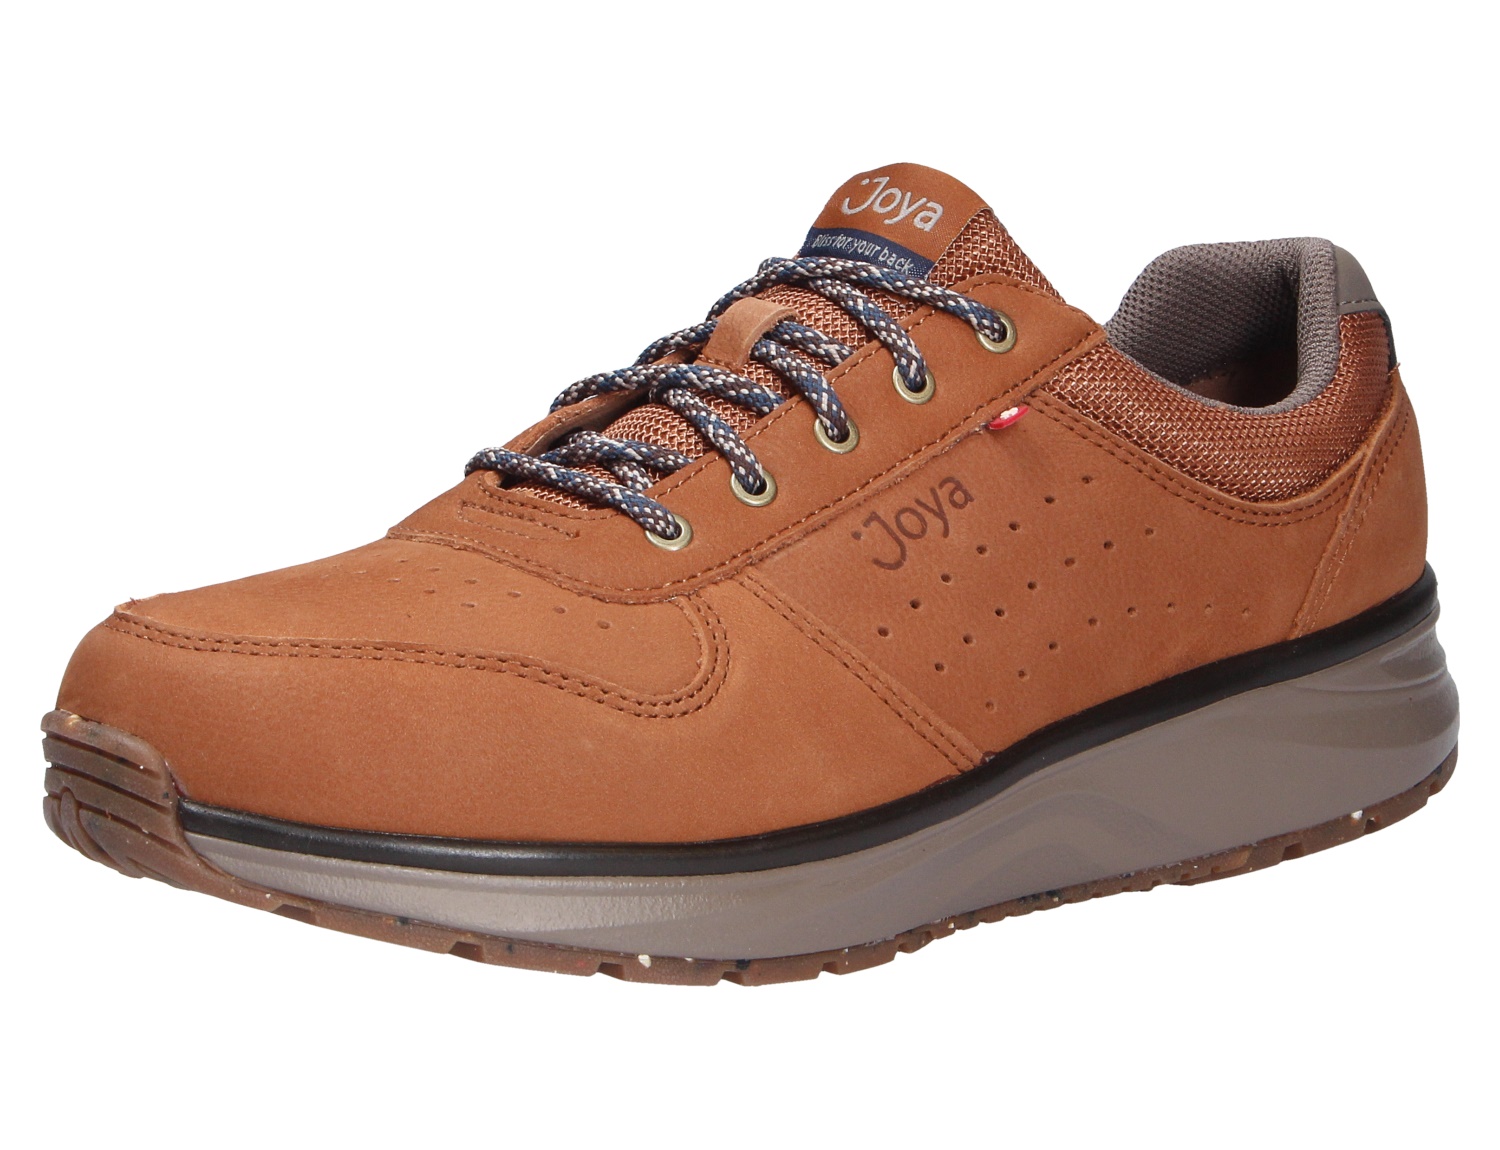 Dynamo classic M curry brown